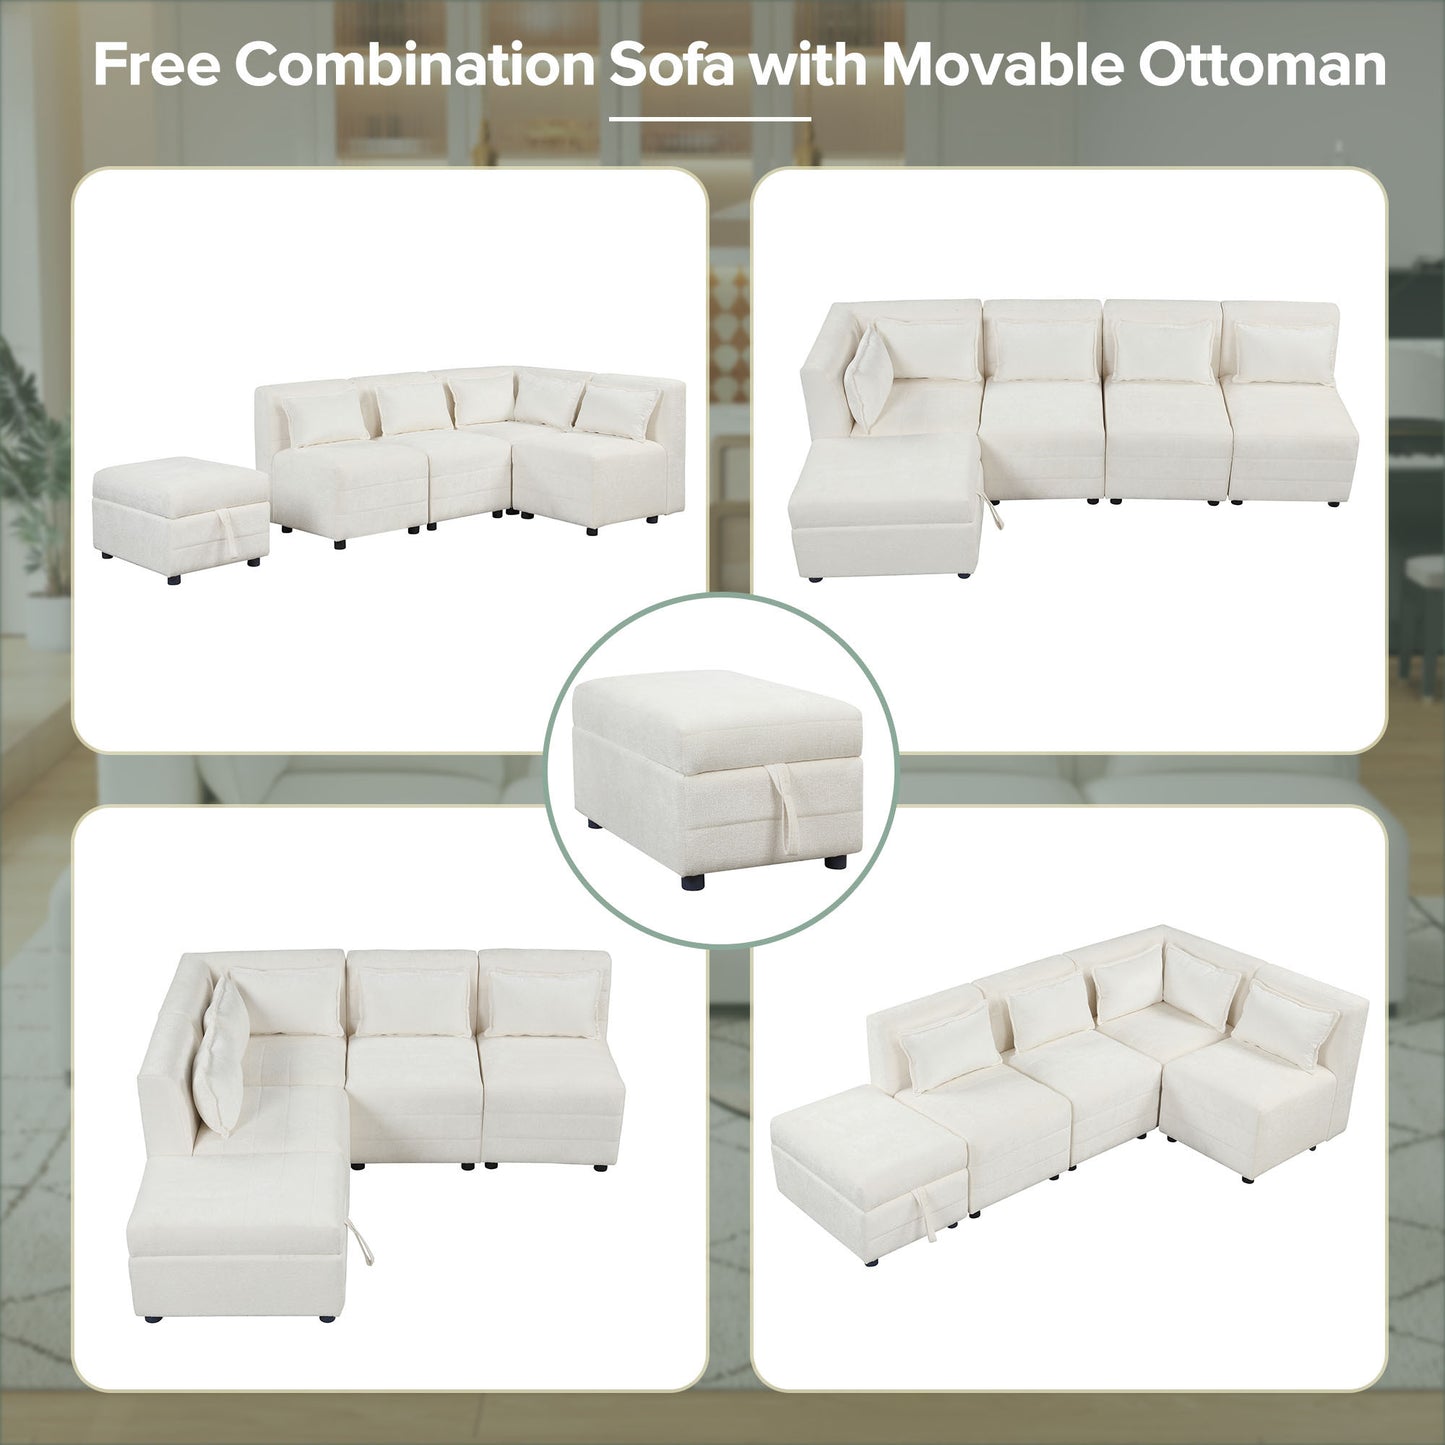 Sofa Set, 5-Seater Couch with Ottoman, 5 Pillows